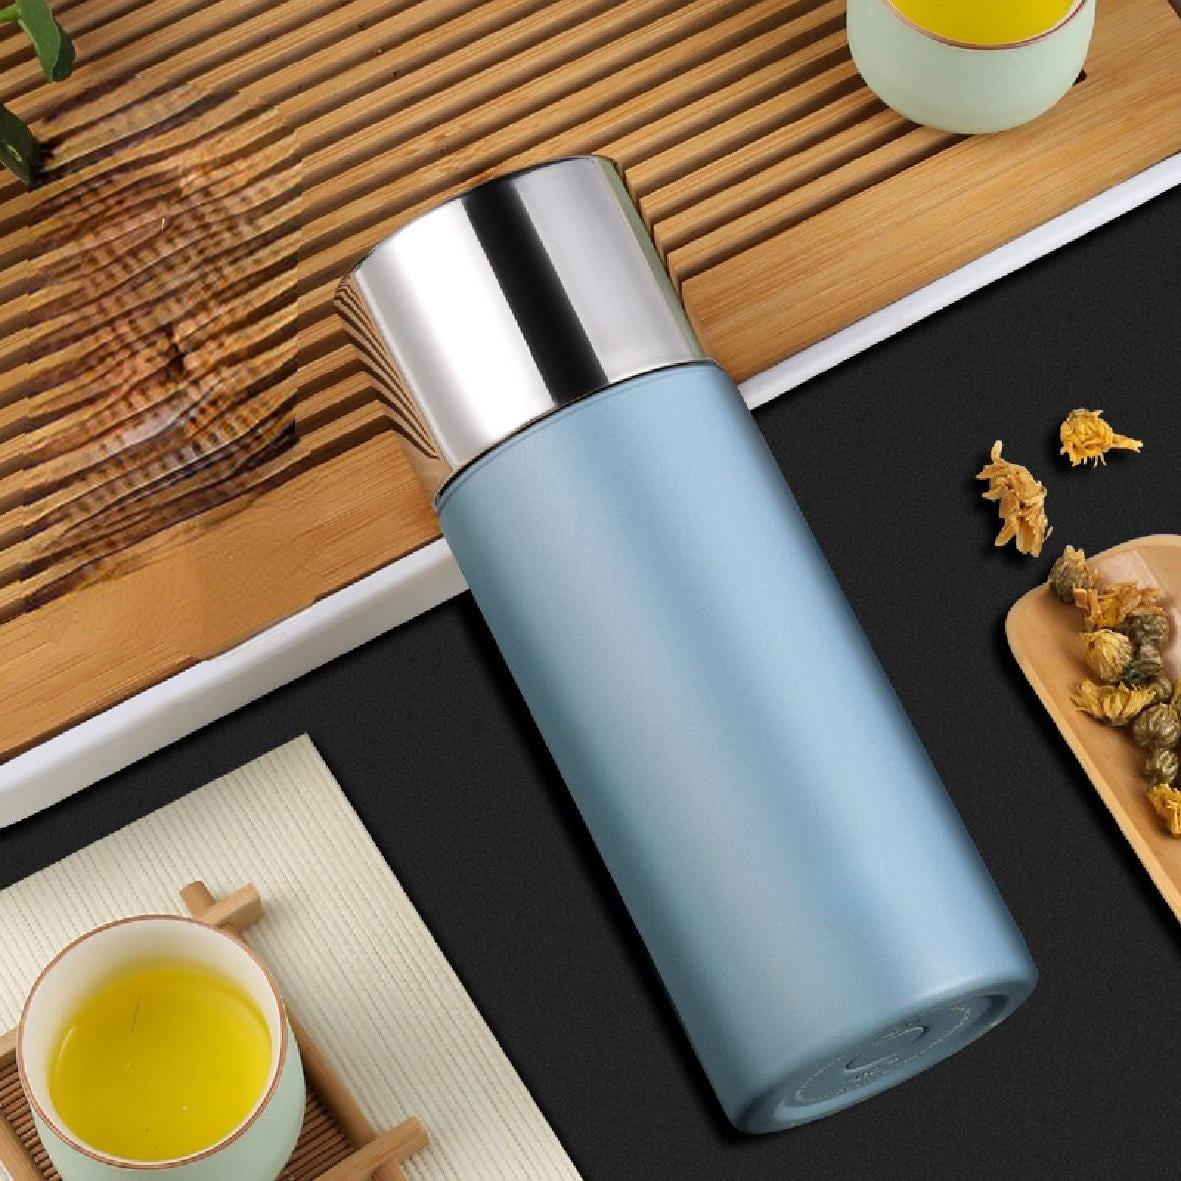 Thermos Tea Separating Tea Making Insulation Cup For Men And